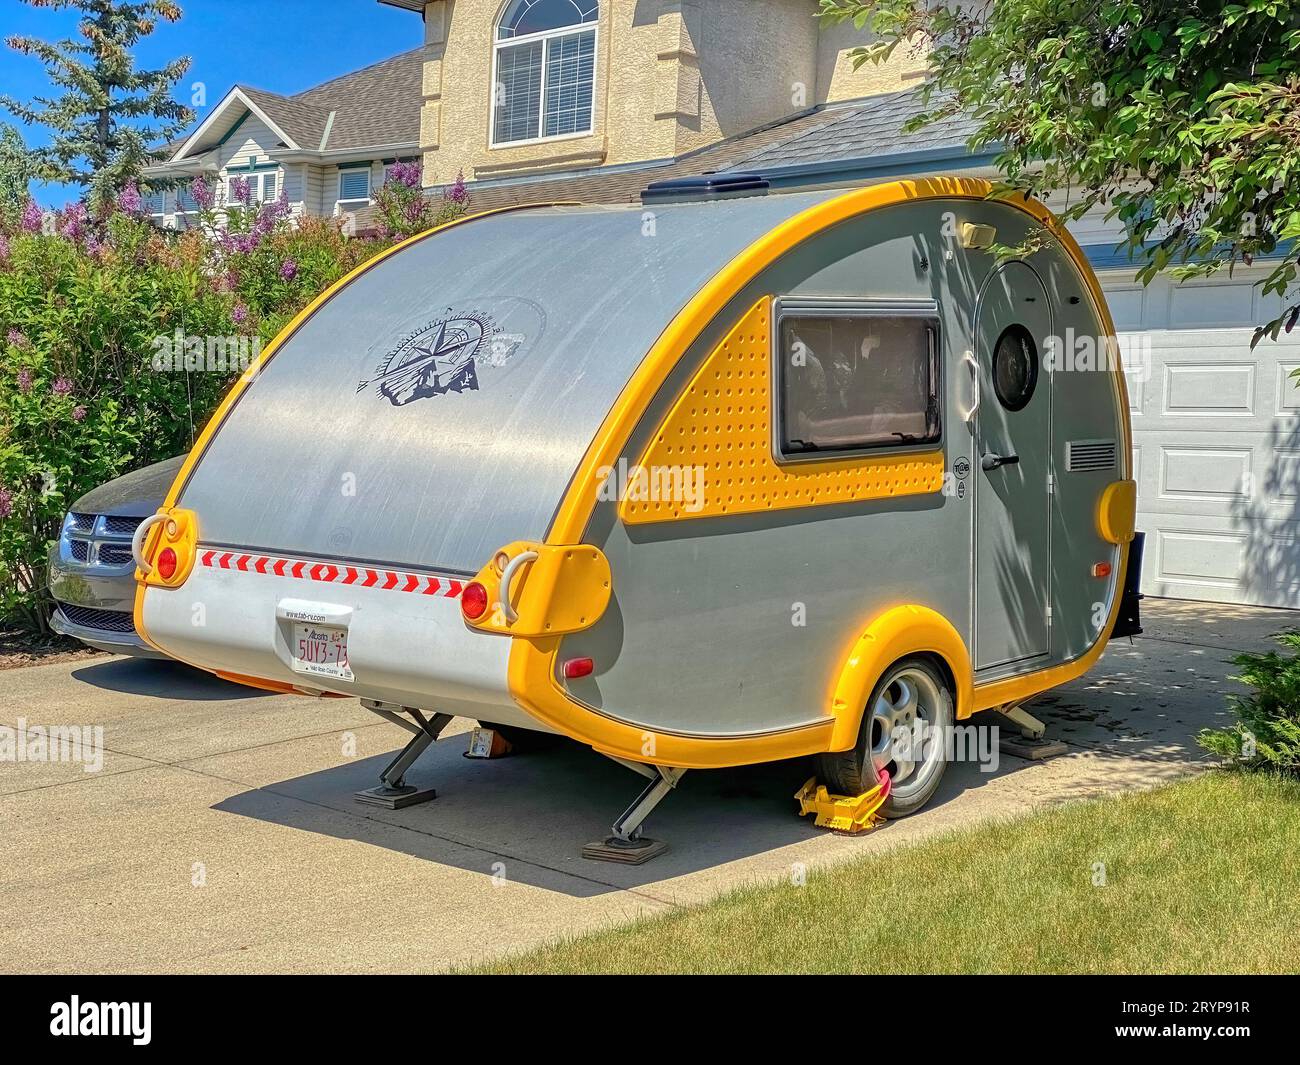 Calgary, Alberta, Canada. Jun 6, 2023.A Teardrop Camping Trailer parked in front of a house. Stock Photo